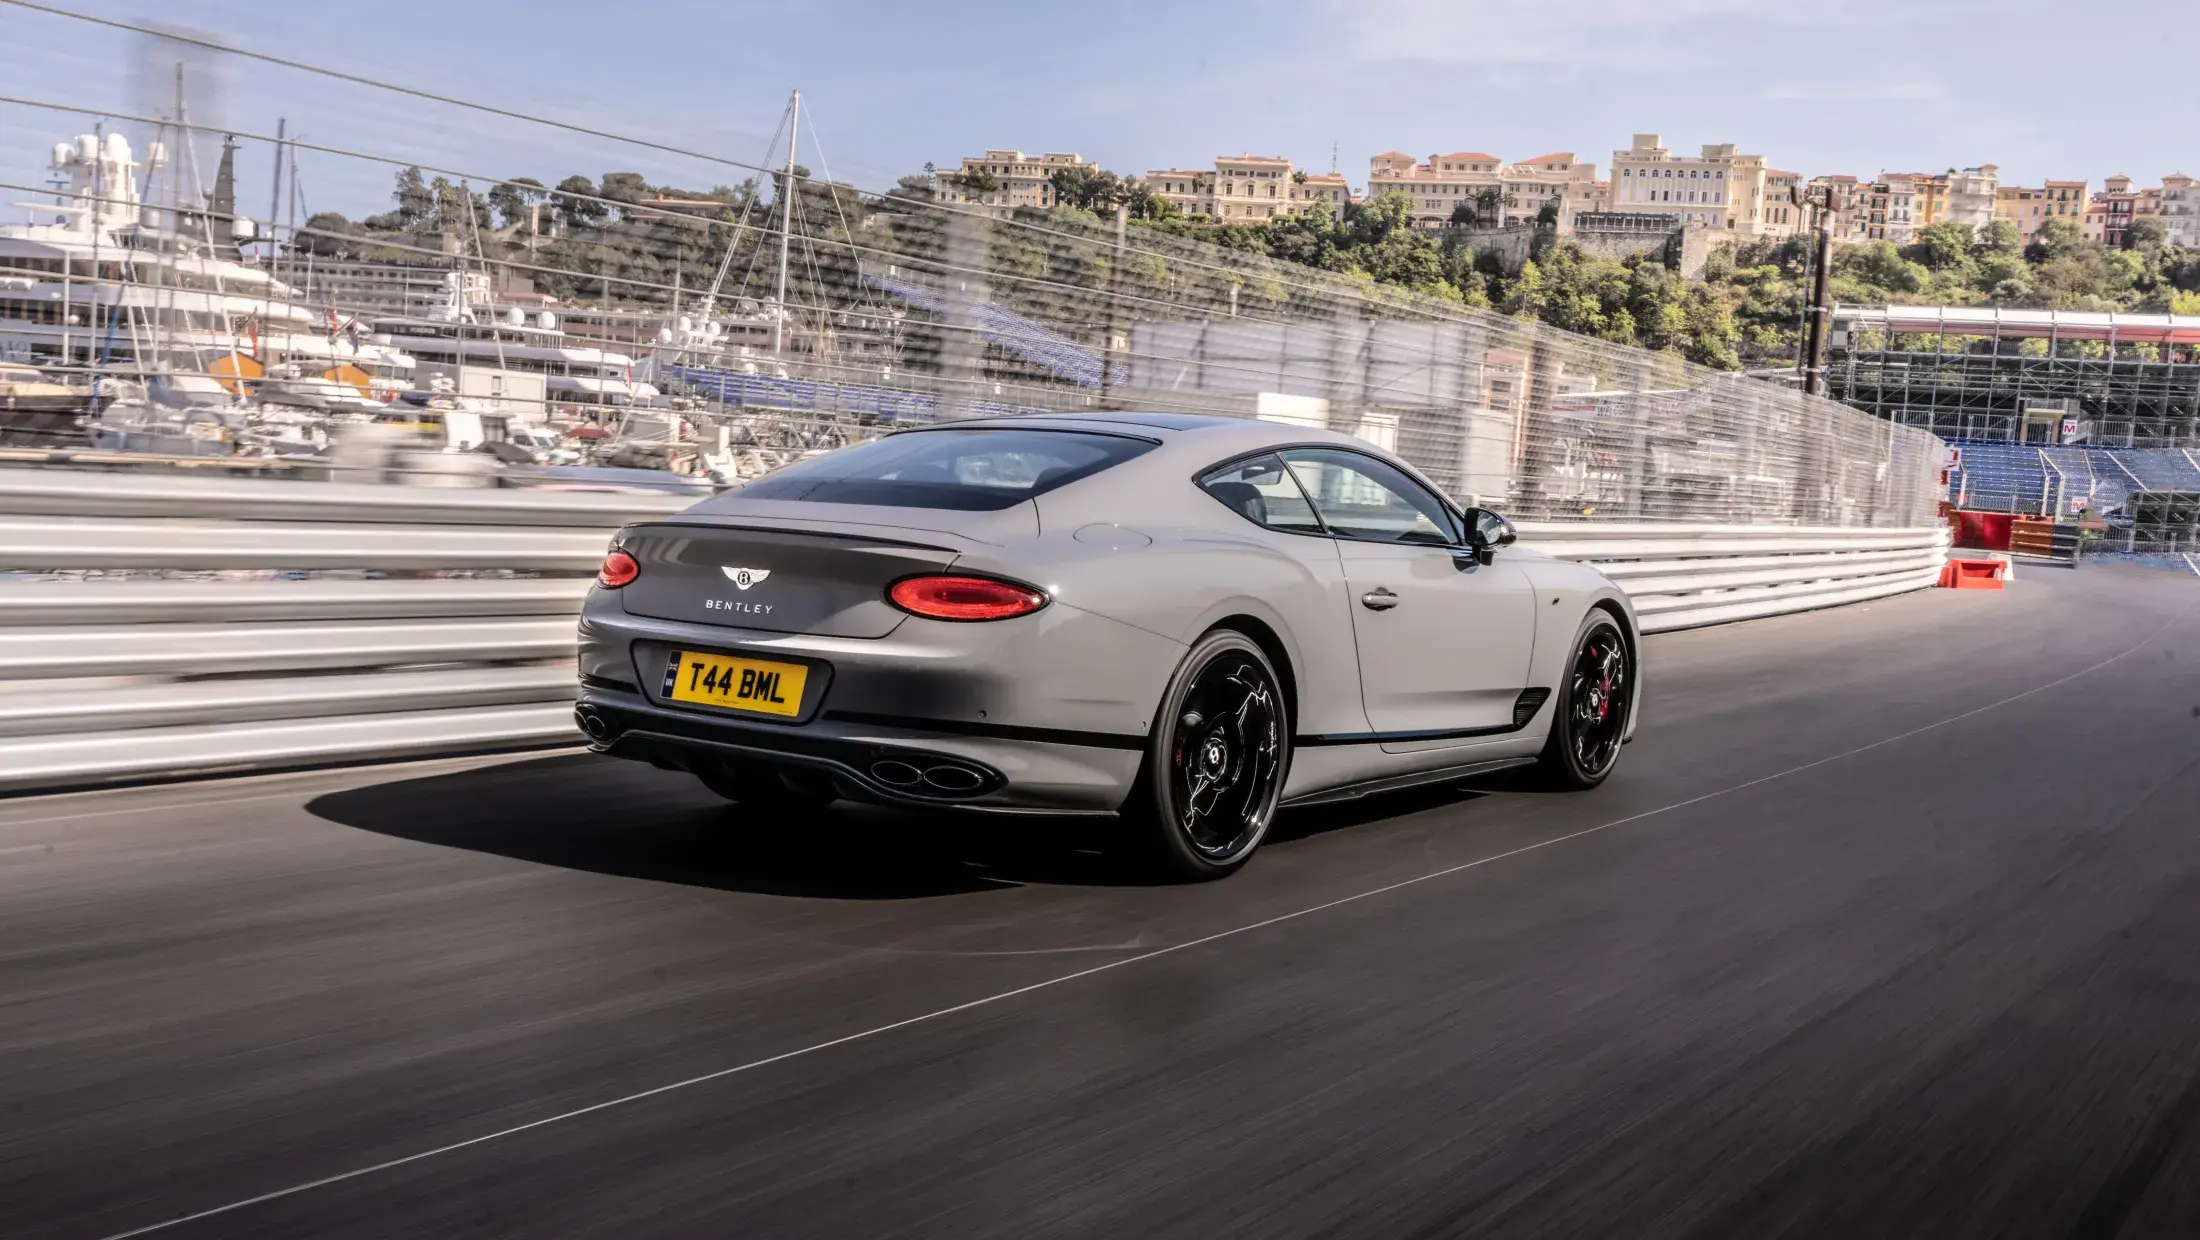 Continental GT S